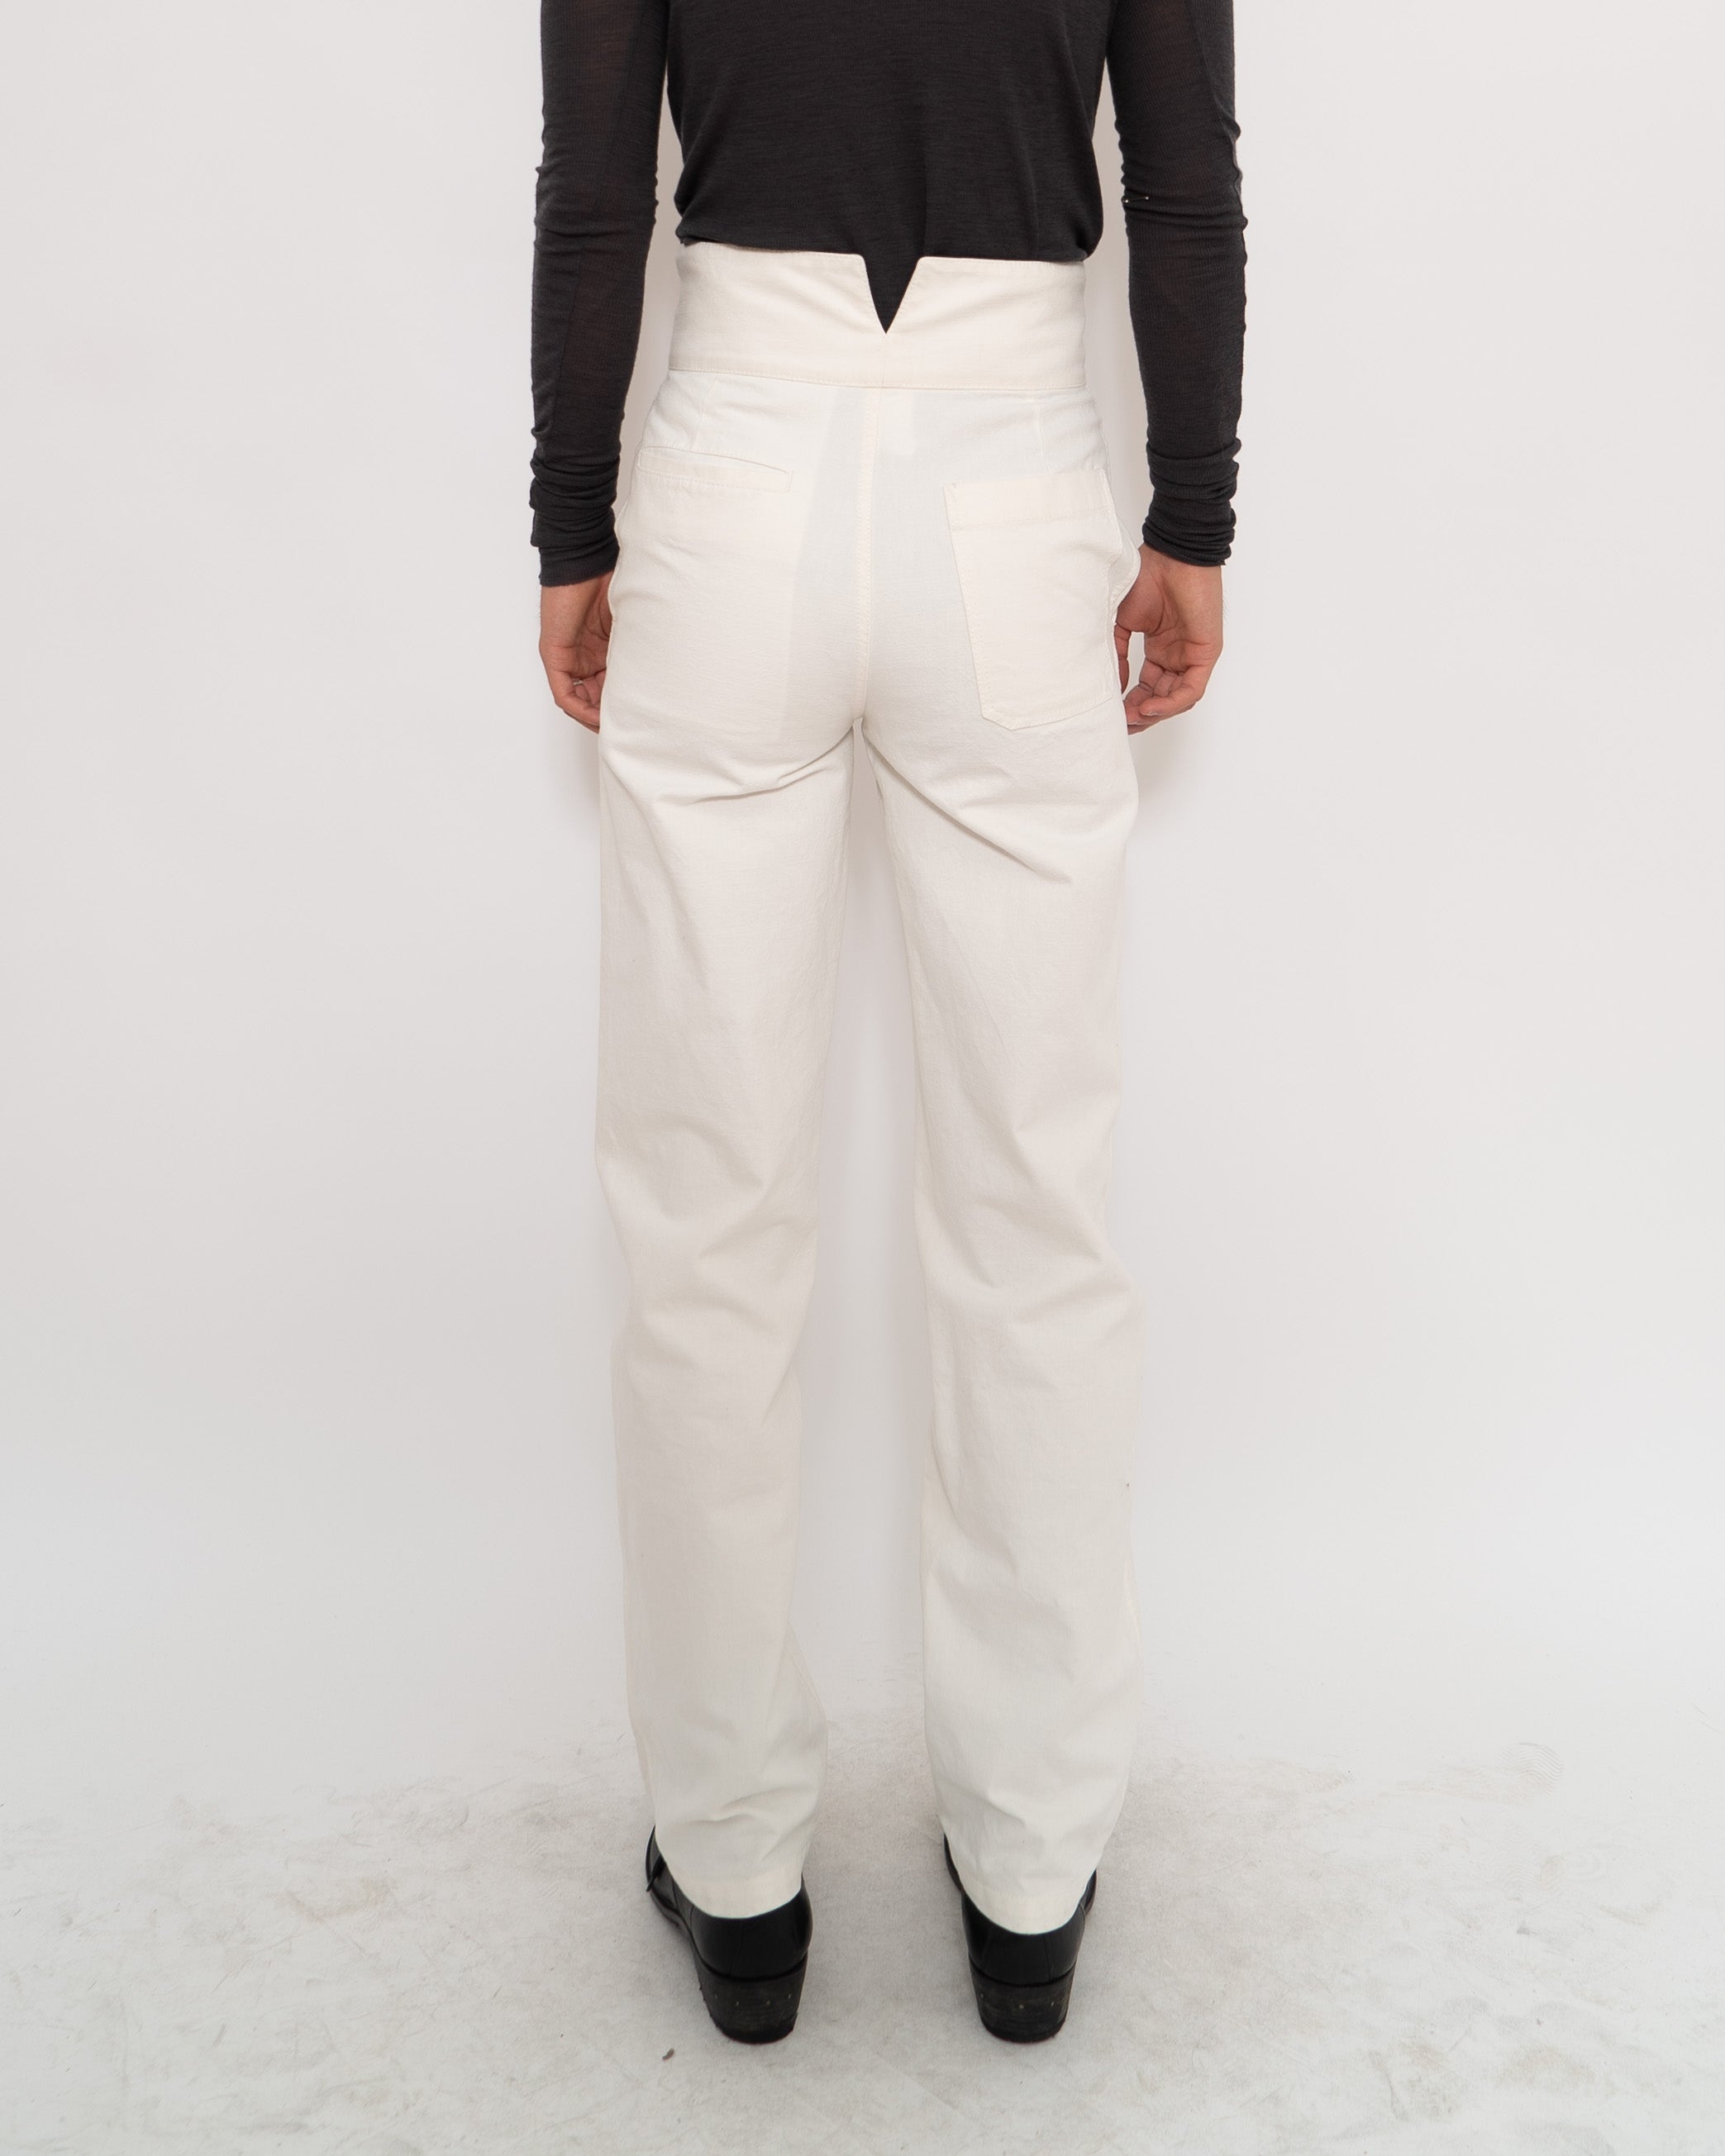 SS20 Crystall White Workwear Trousers Sample